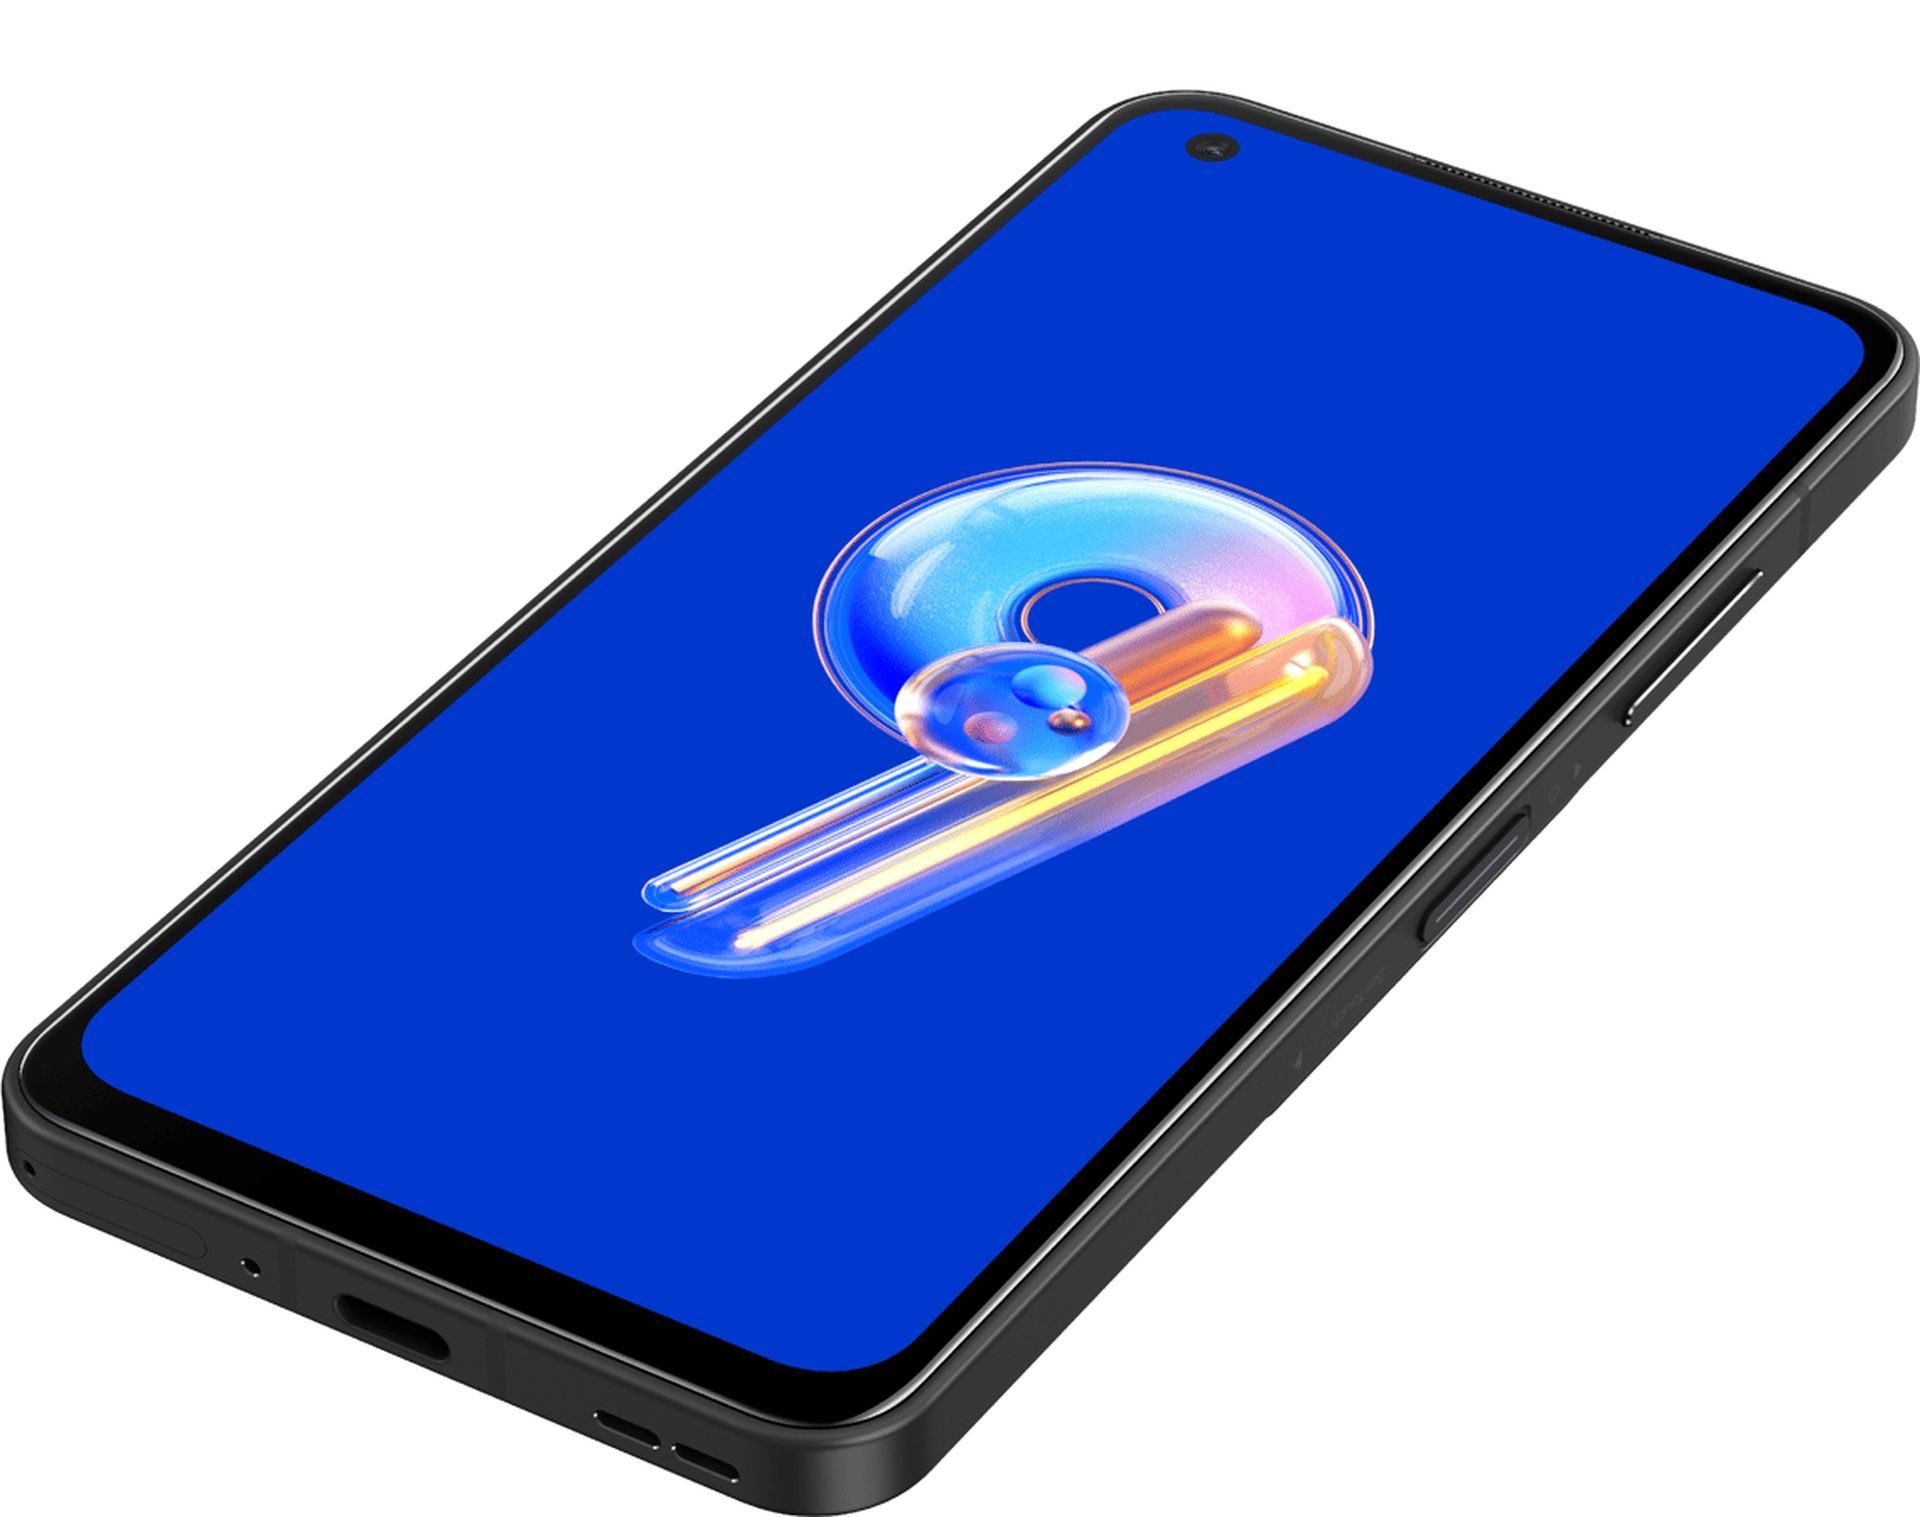 In this article, we are going to be sharing with you our ASUS ZenFone 9 vs Google Pixel 6a comparison, so you can decide between the two Android phones.